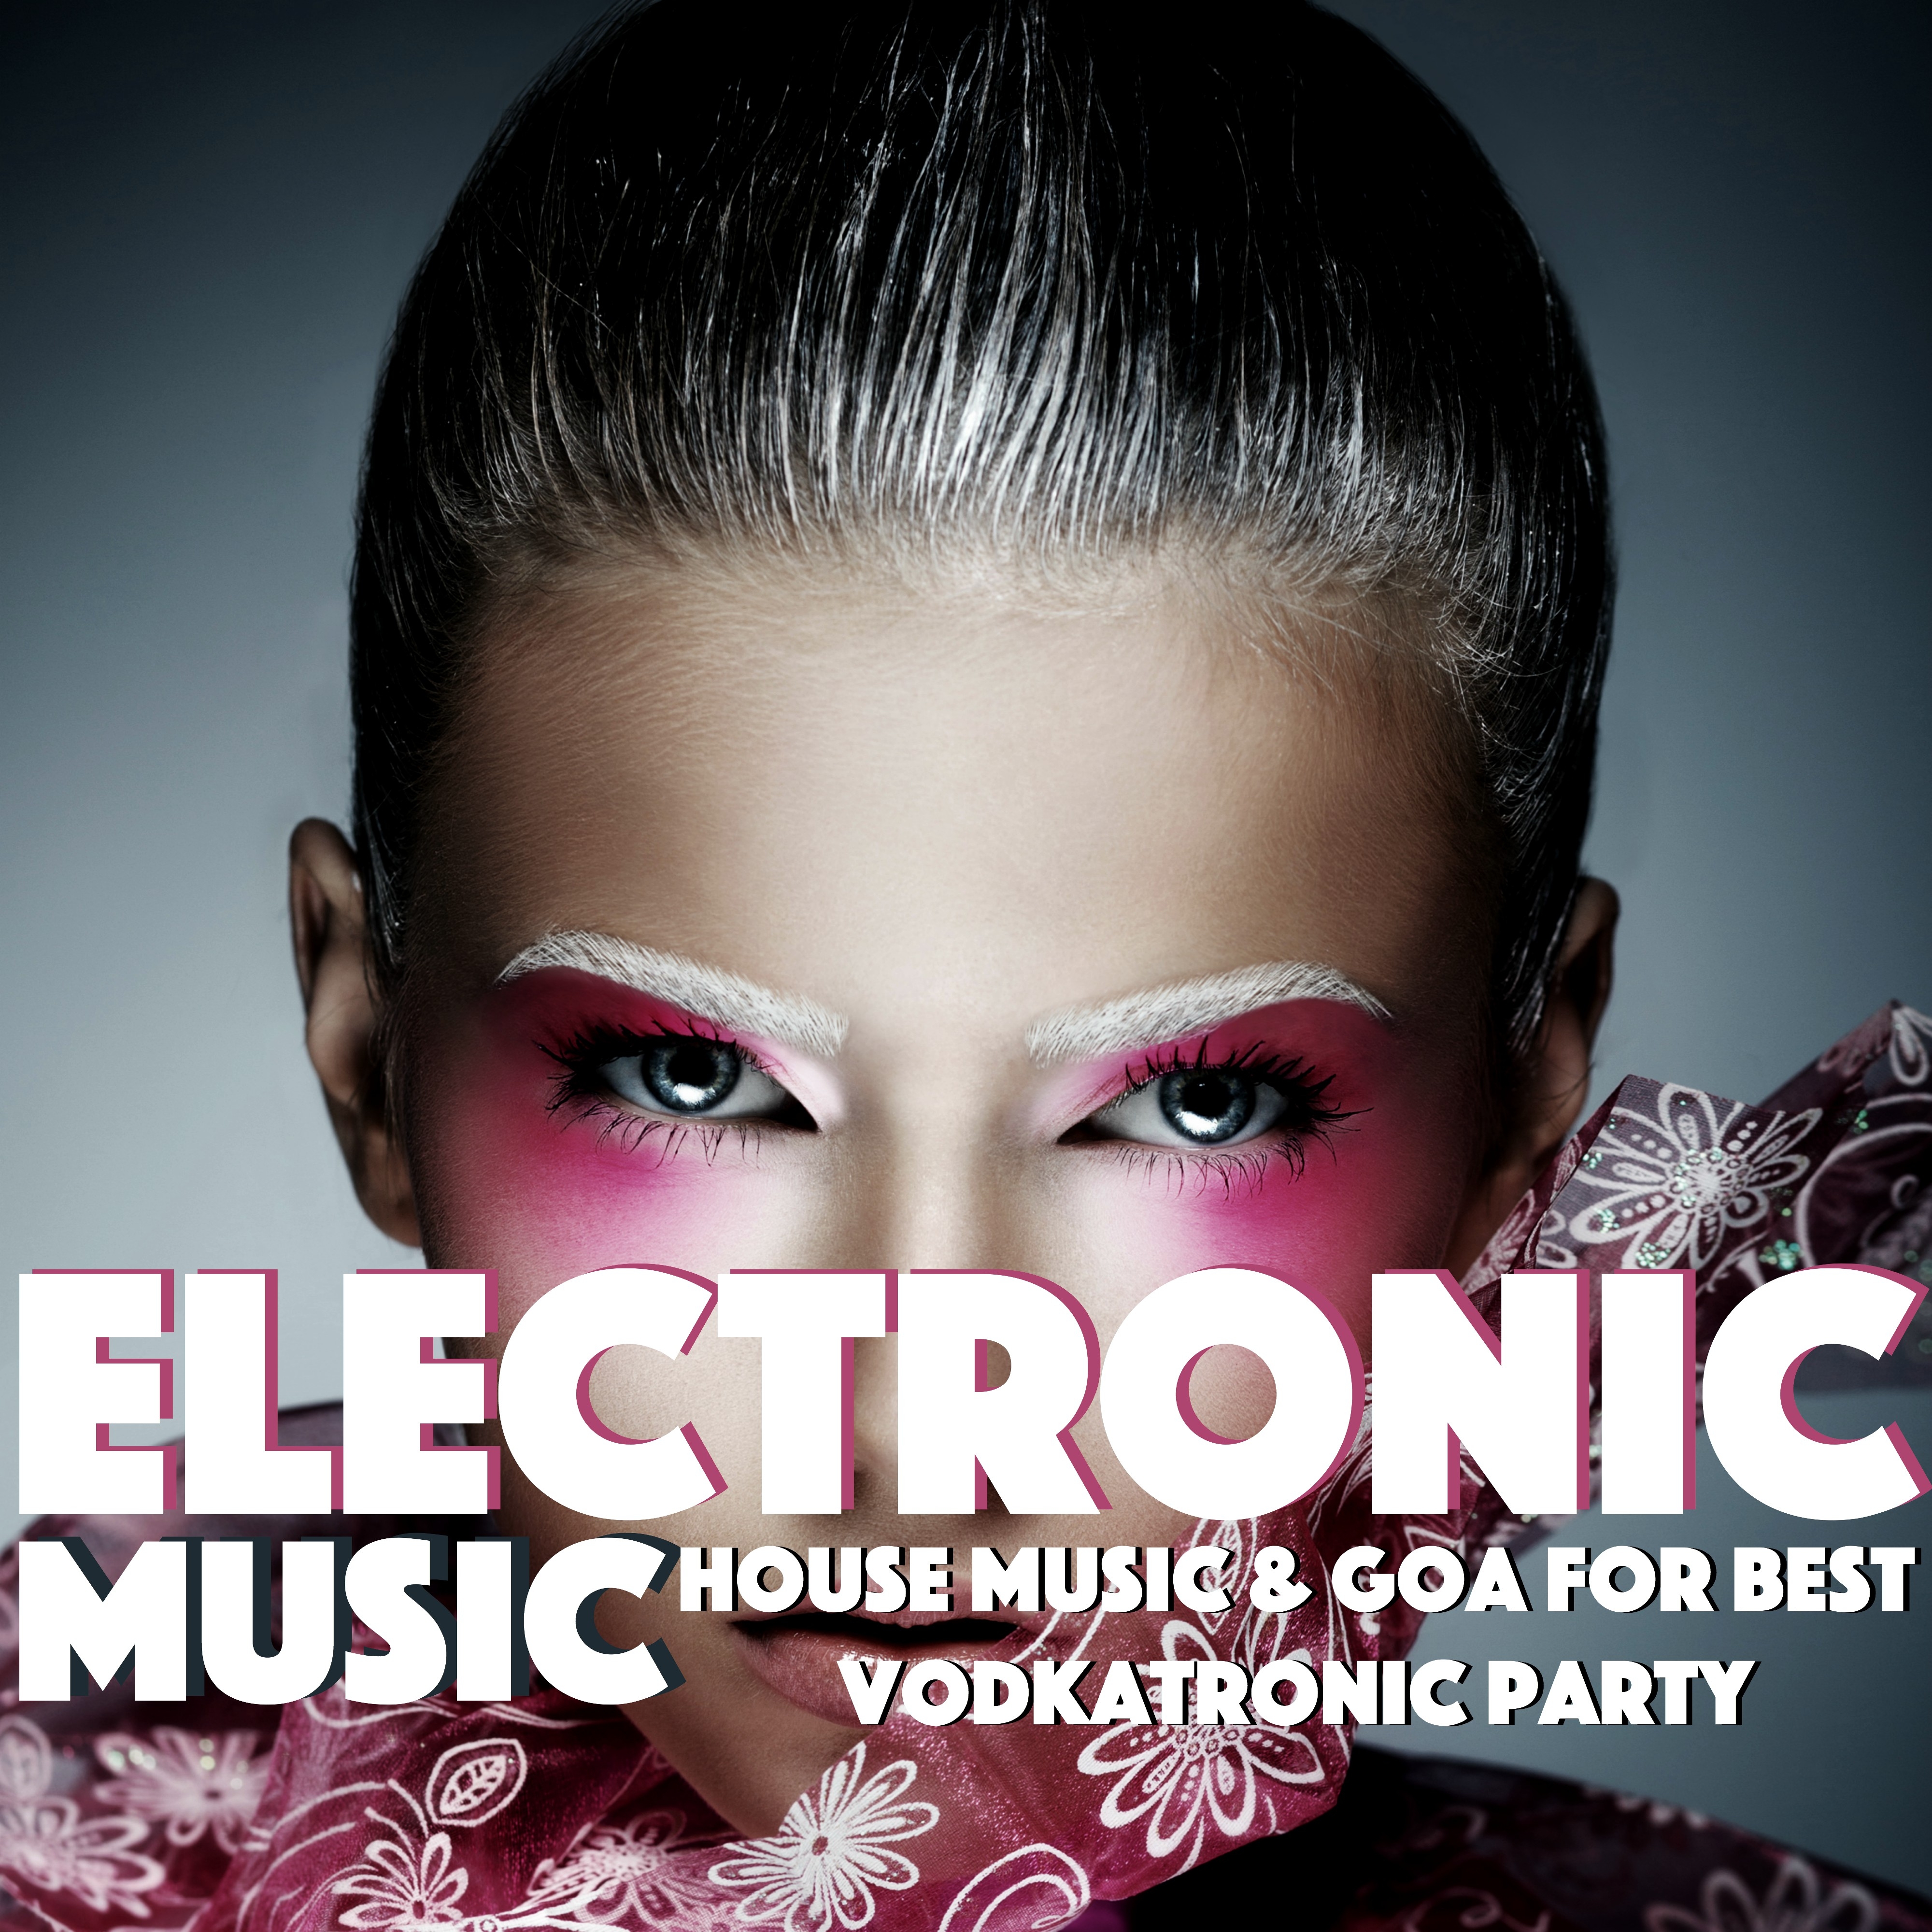 Electronic Music - House Music & Goa for Best VodkaTronic Party